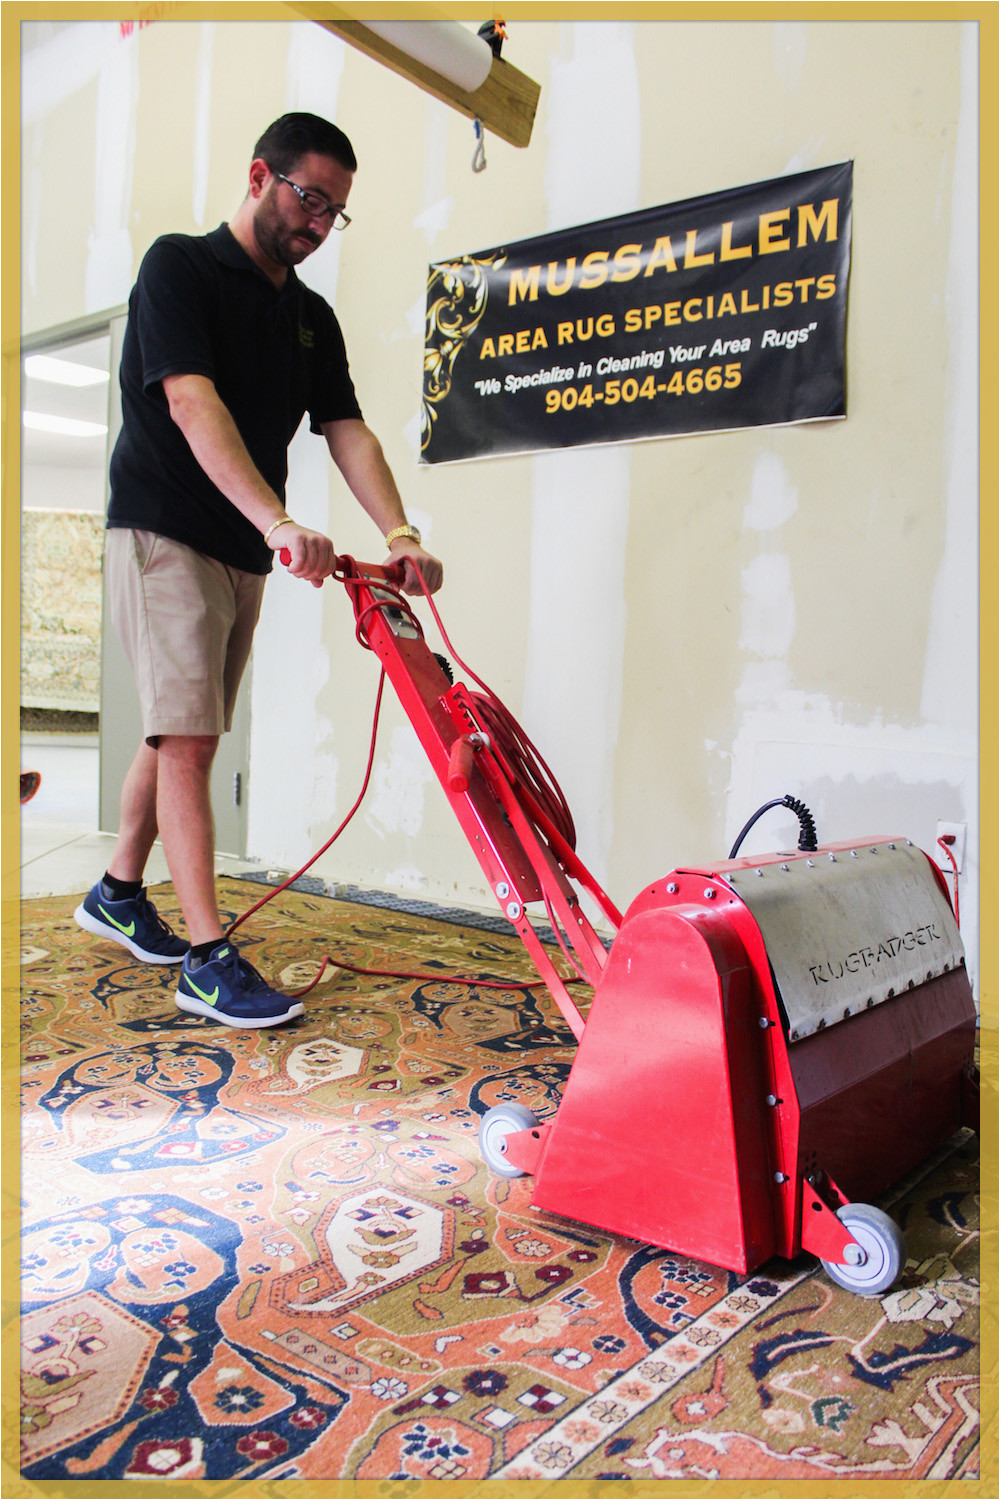 Area Rug Cleaning Jacksonville Fl area Rugs Specialists oriental Rug Cleaning & Repair …